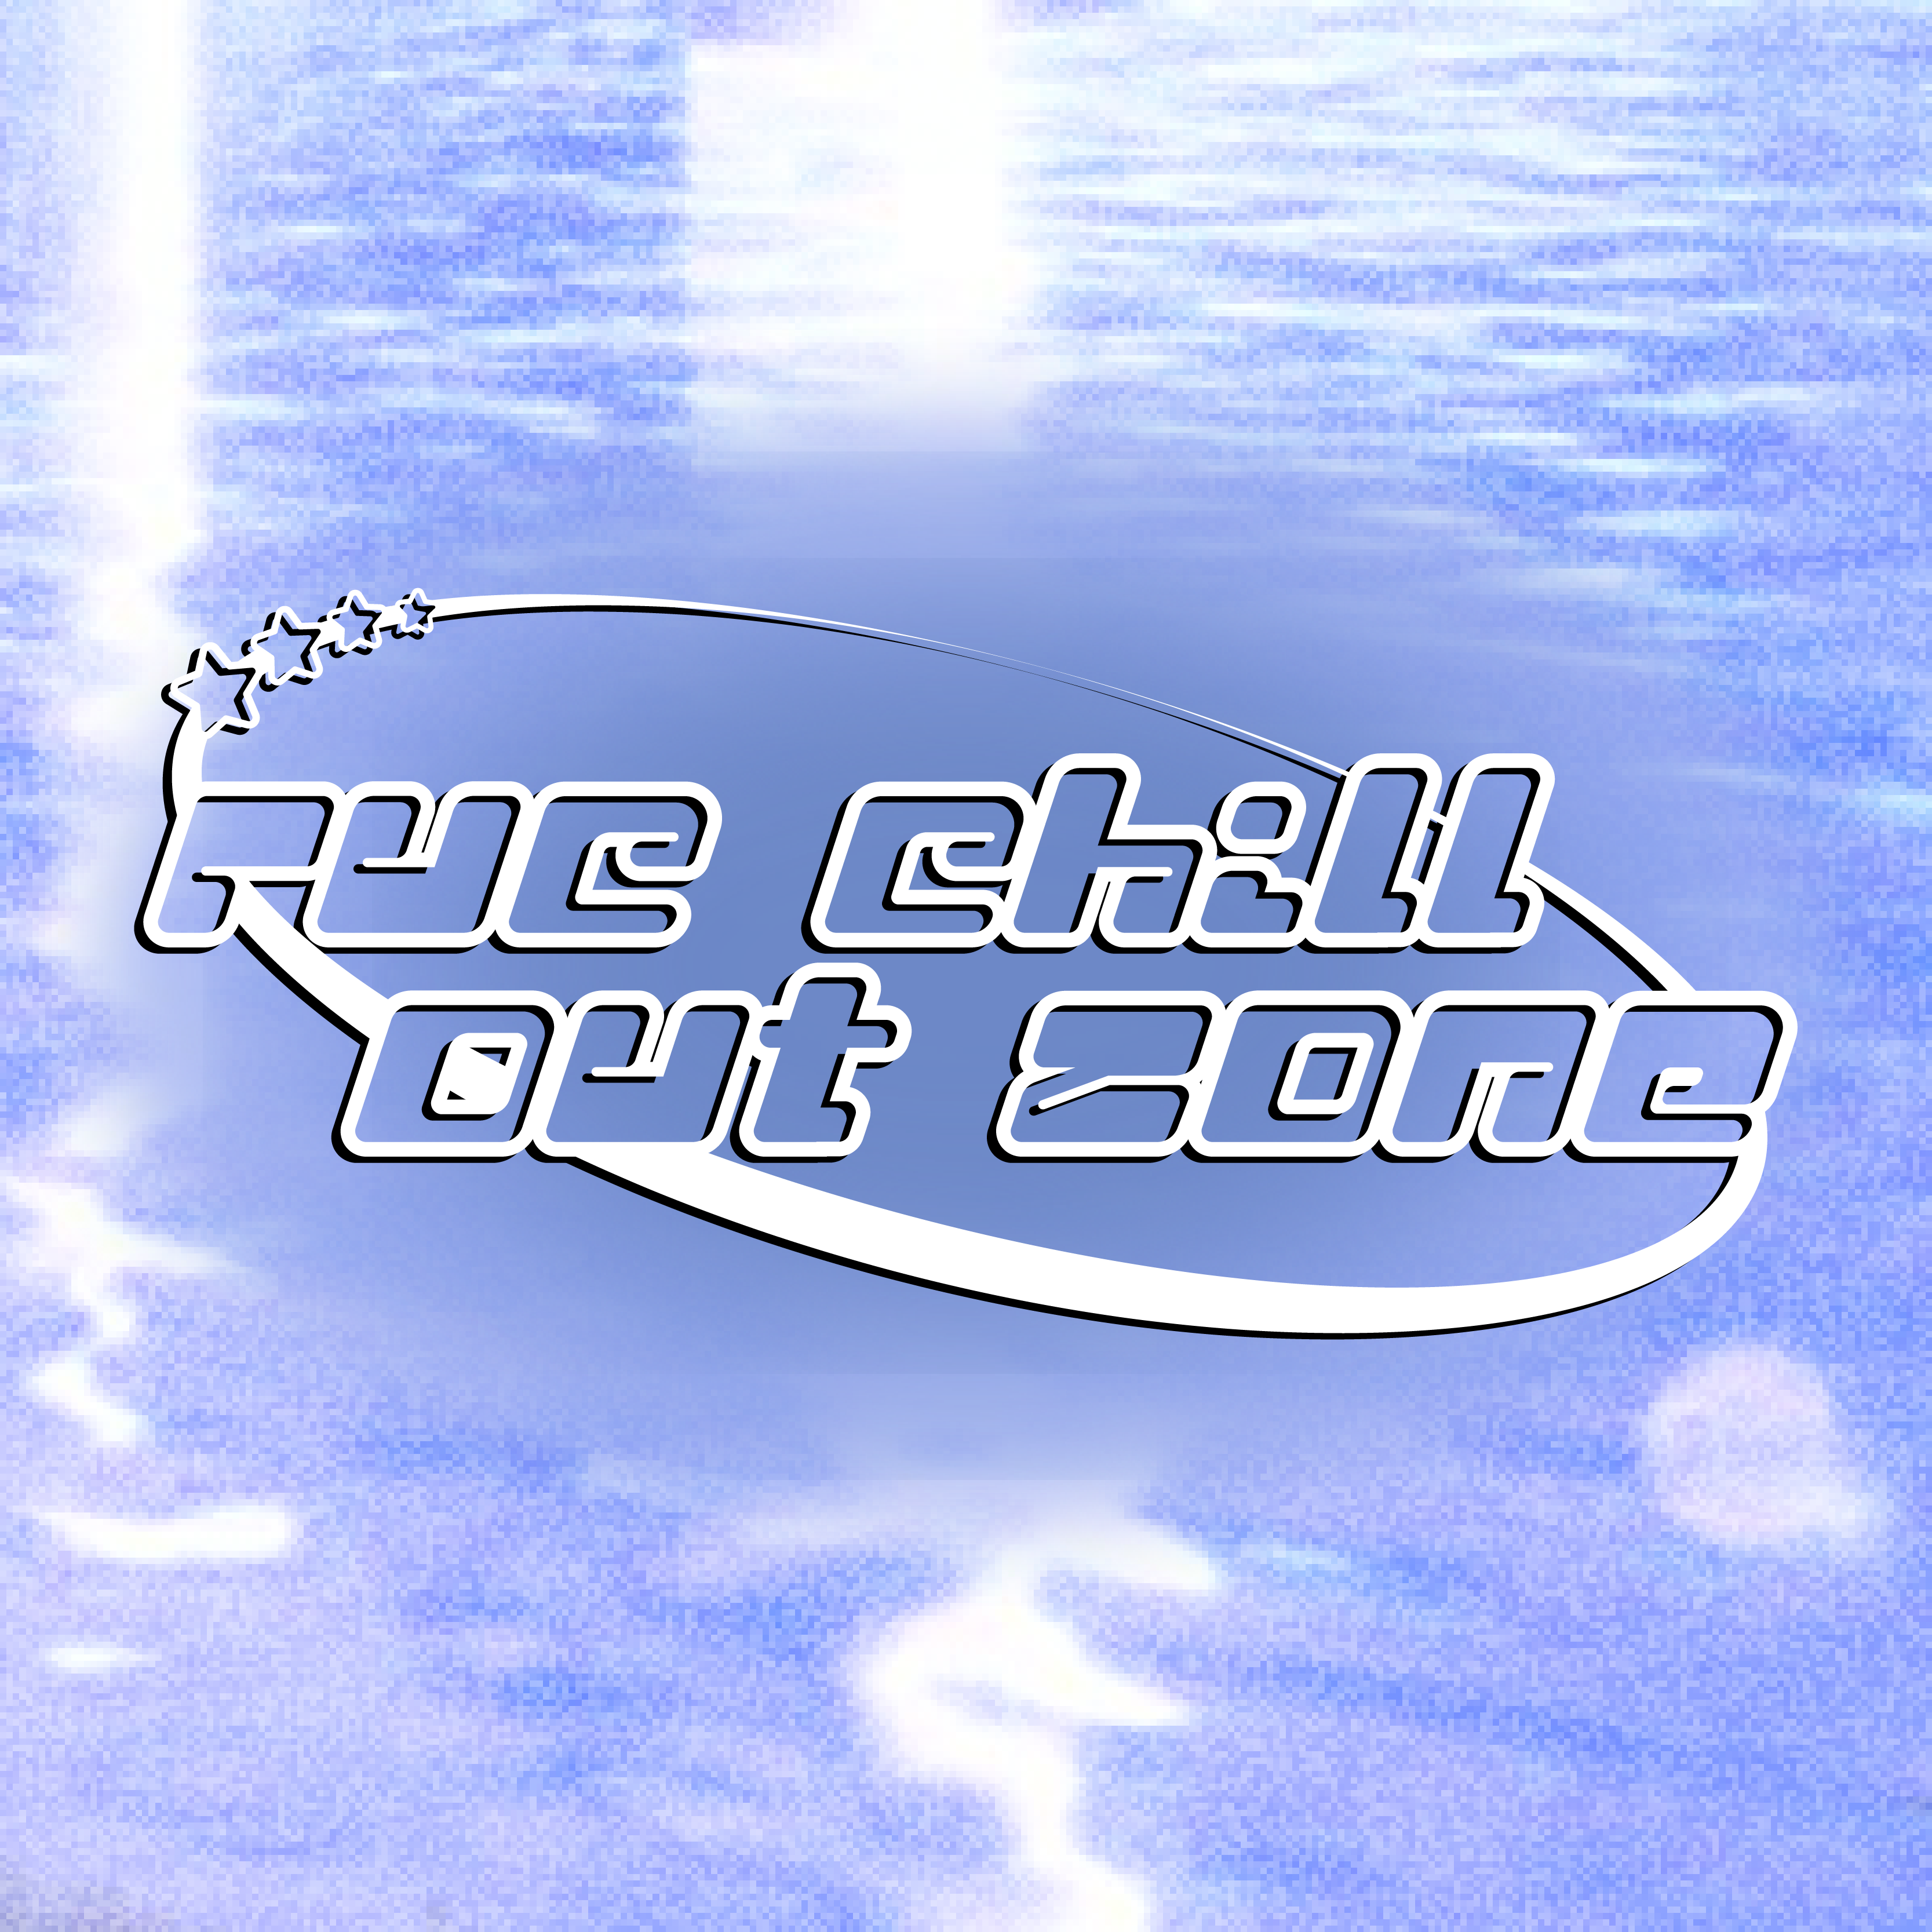 chill out zone socials logo-01